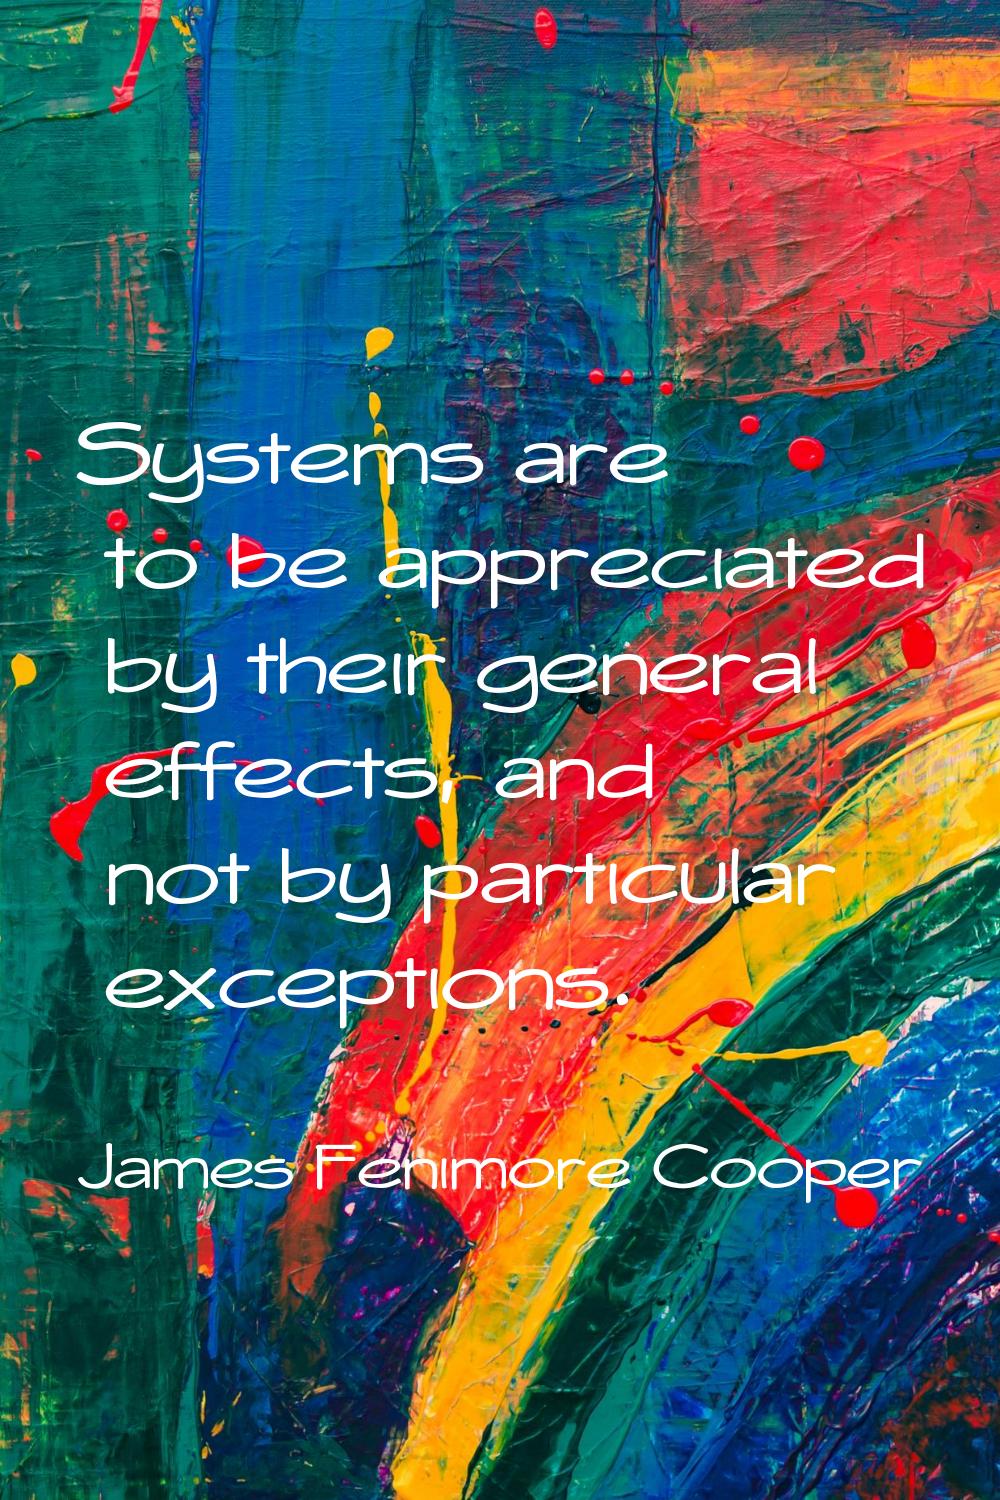 Systems are to be appreciated by their general effects, and not by particular exceptions.